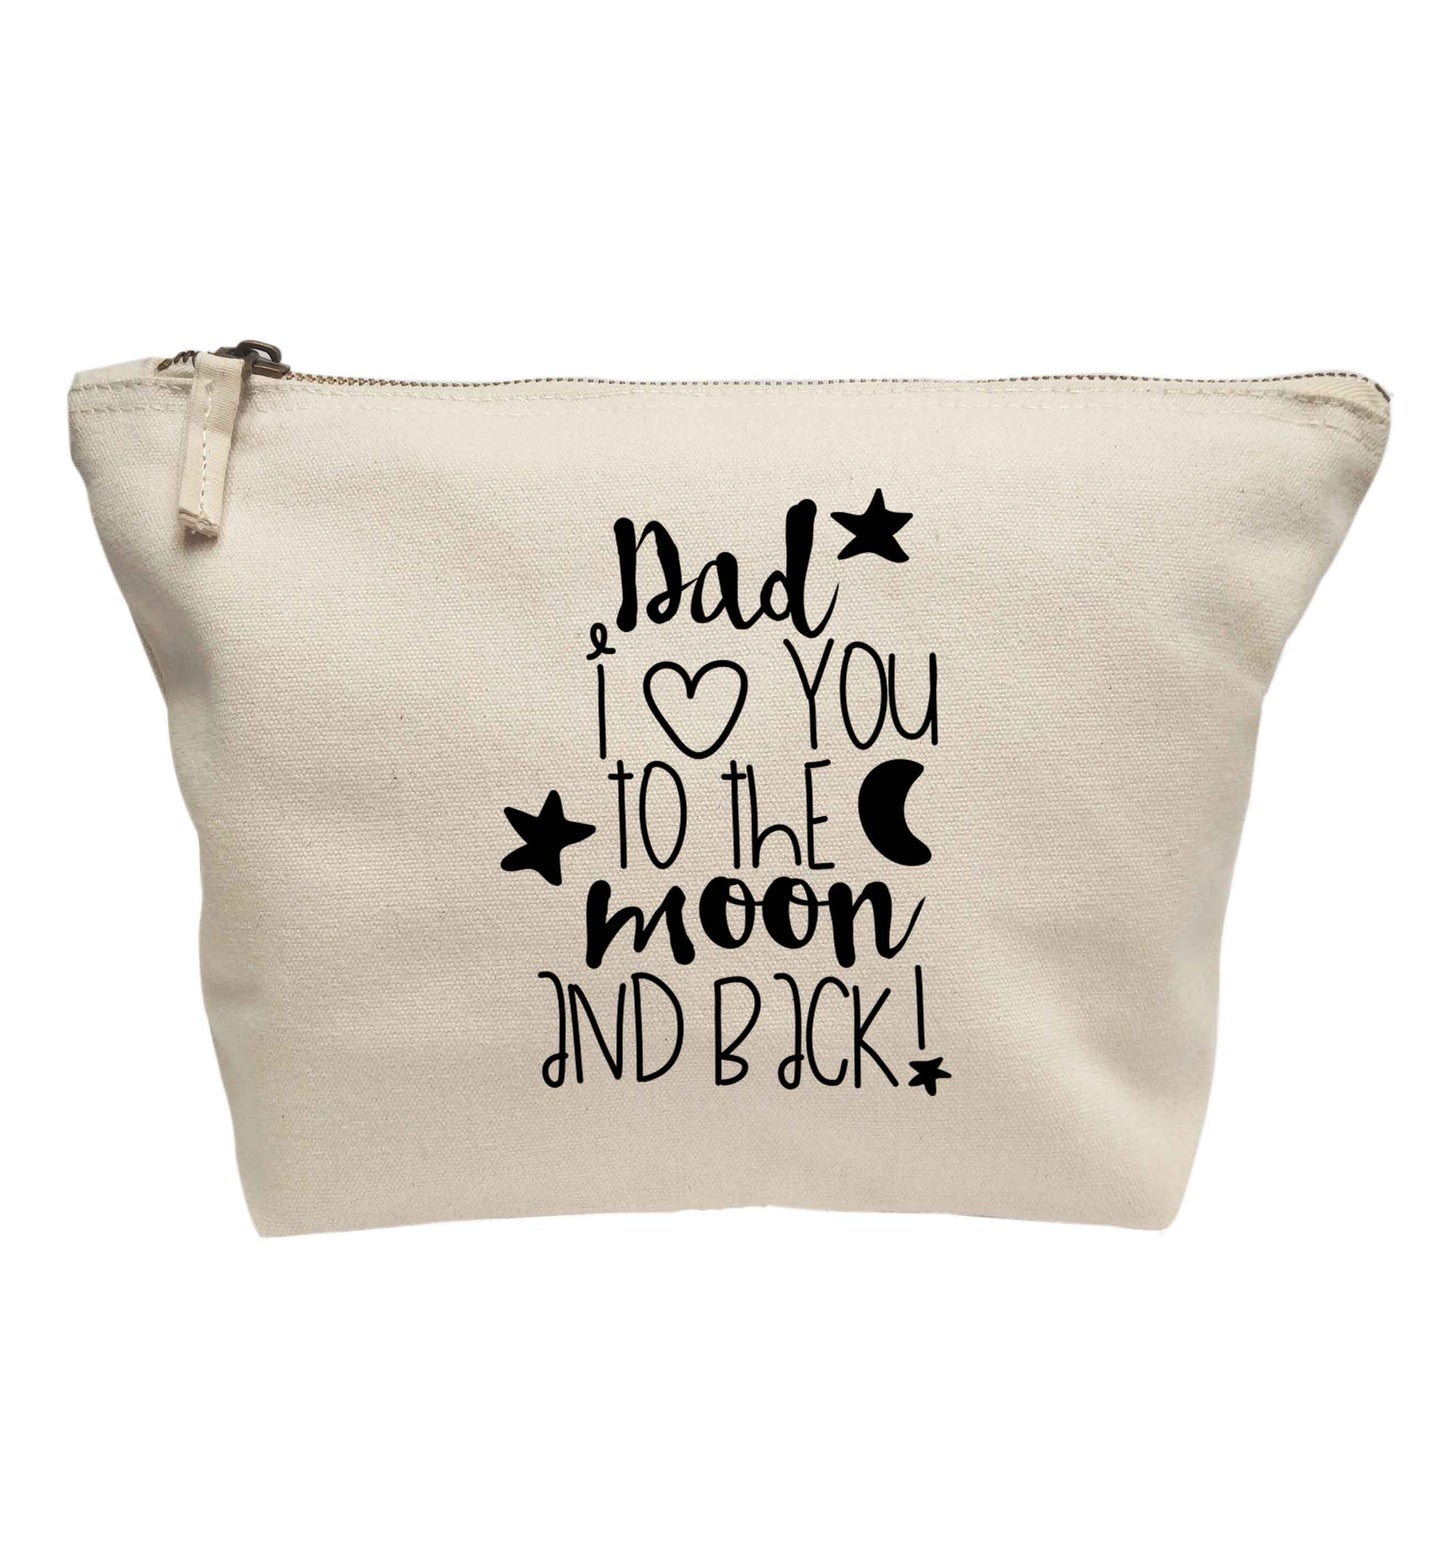 Dad I love you to the moon and back | Makeup / wash bag